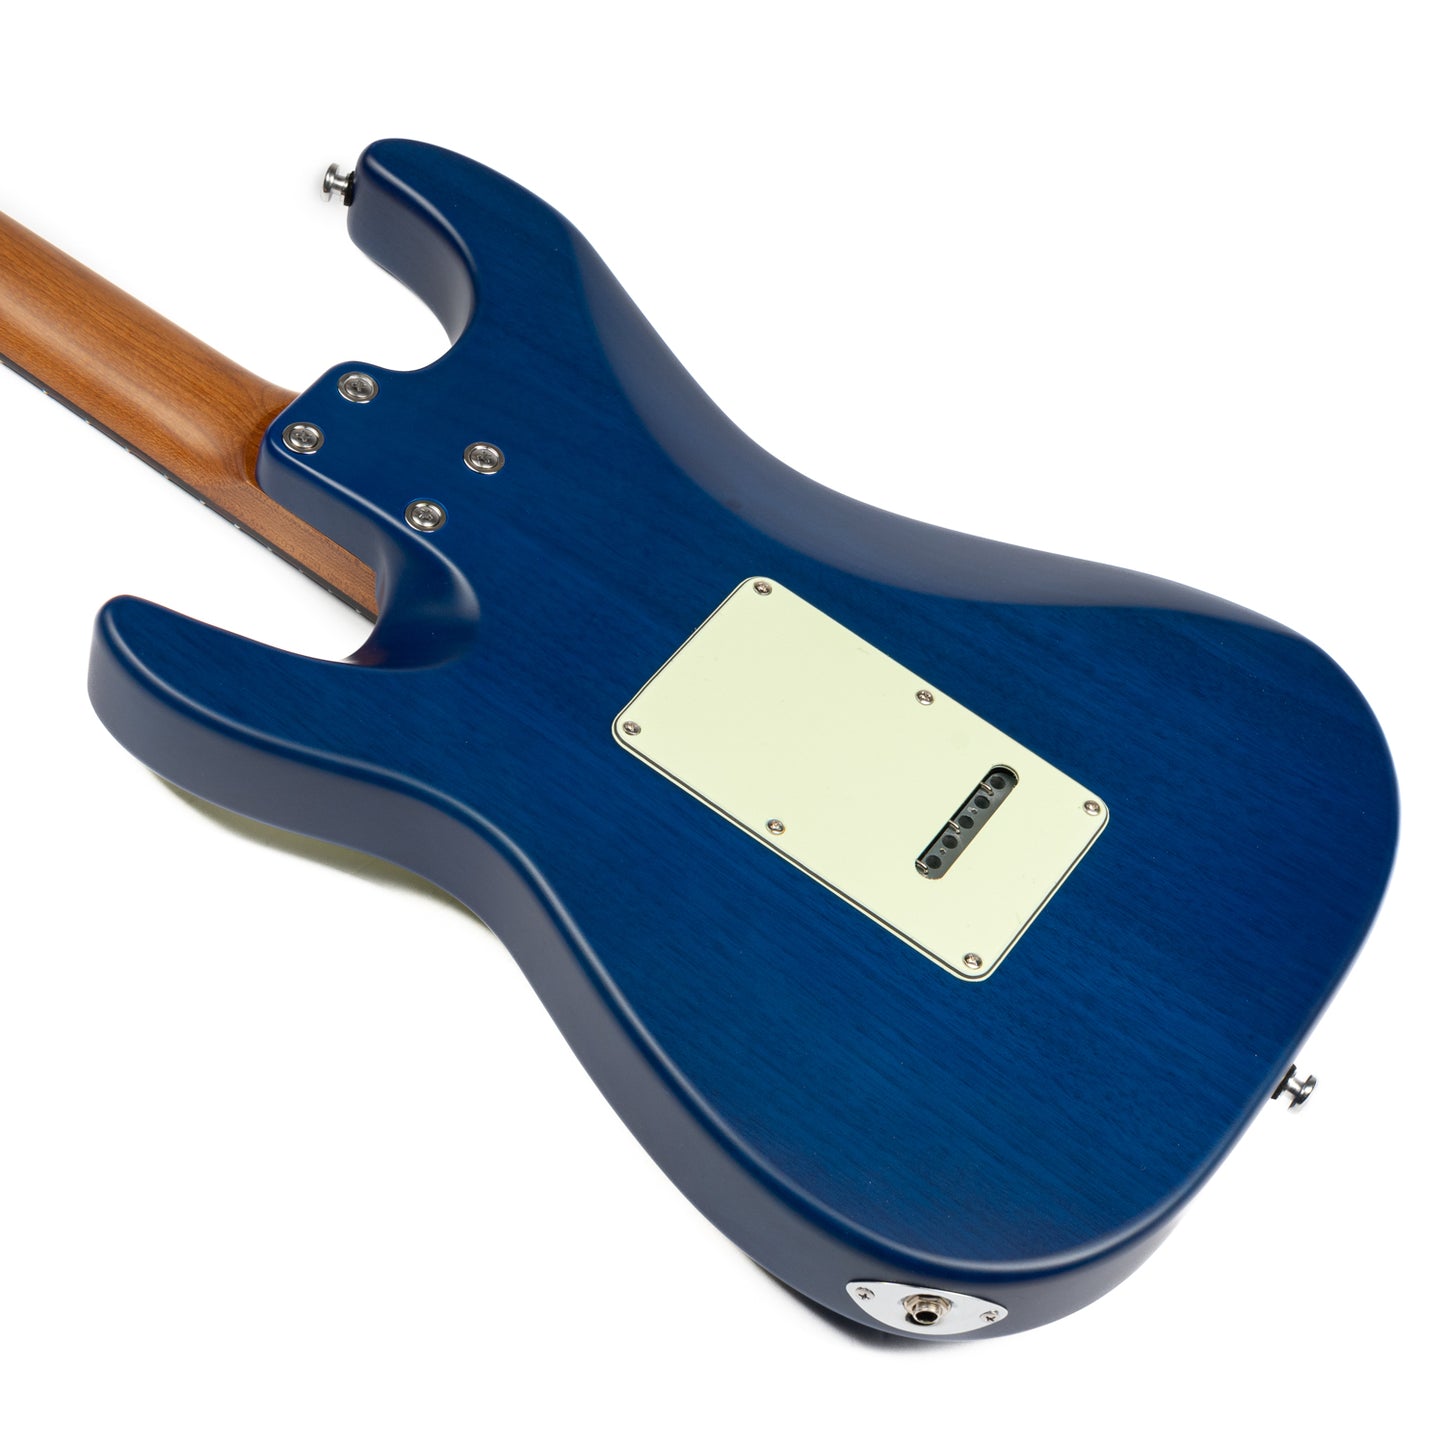 Eart Guitars, YMX-SG3, Roasted Bookmatch Mahogany Body SSS Vintage Style Electric Guitar, Blue